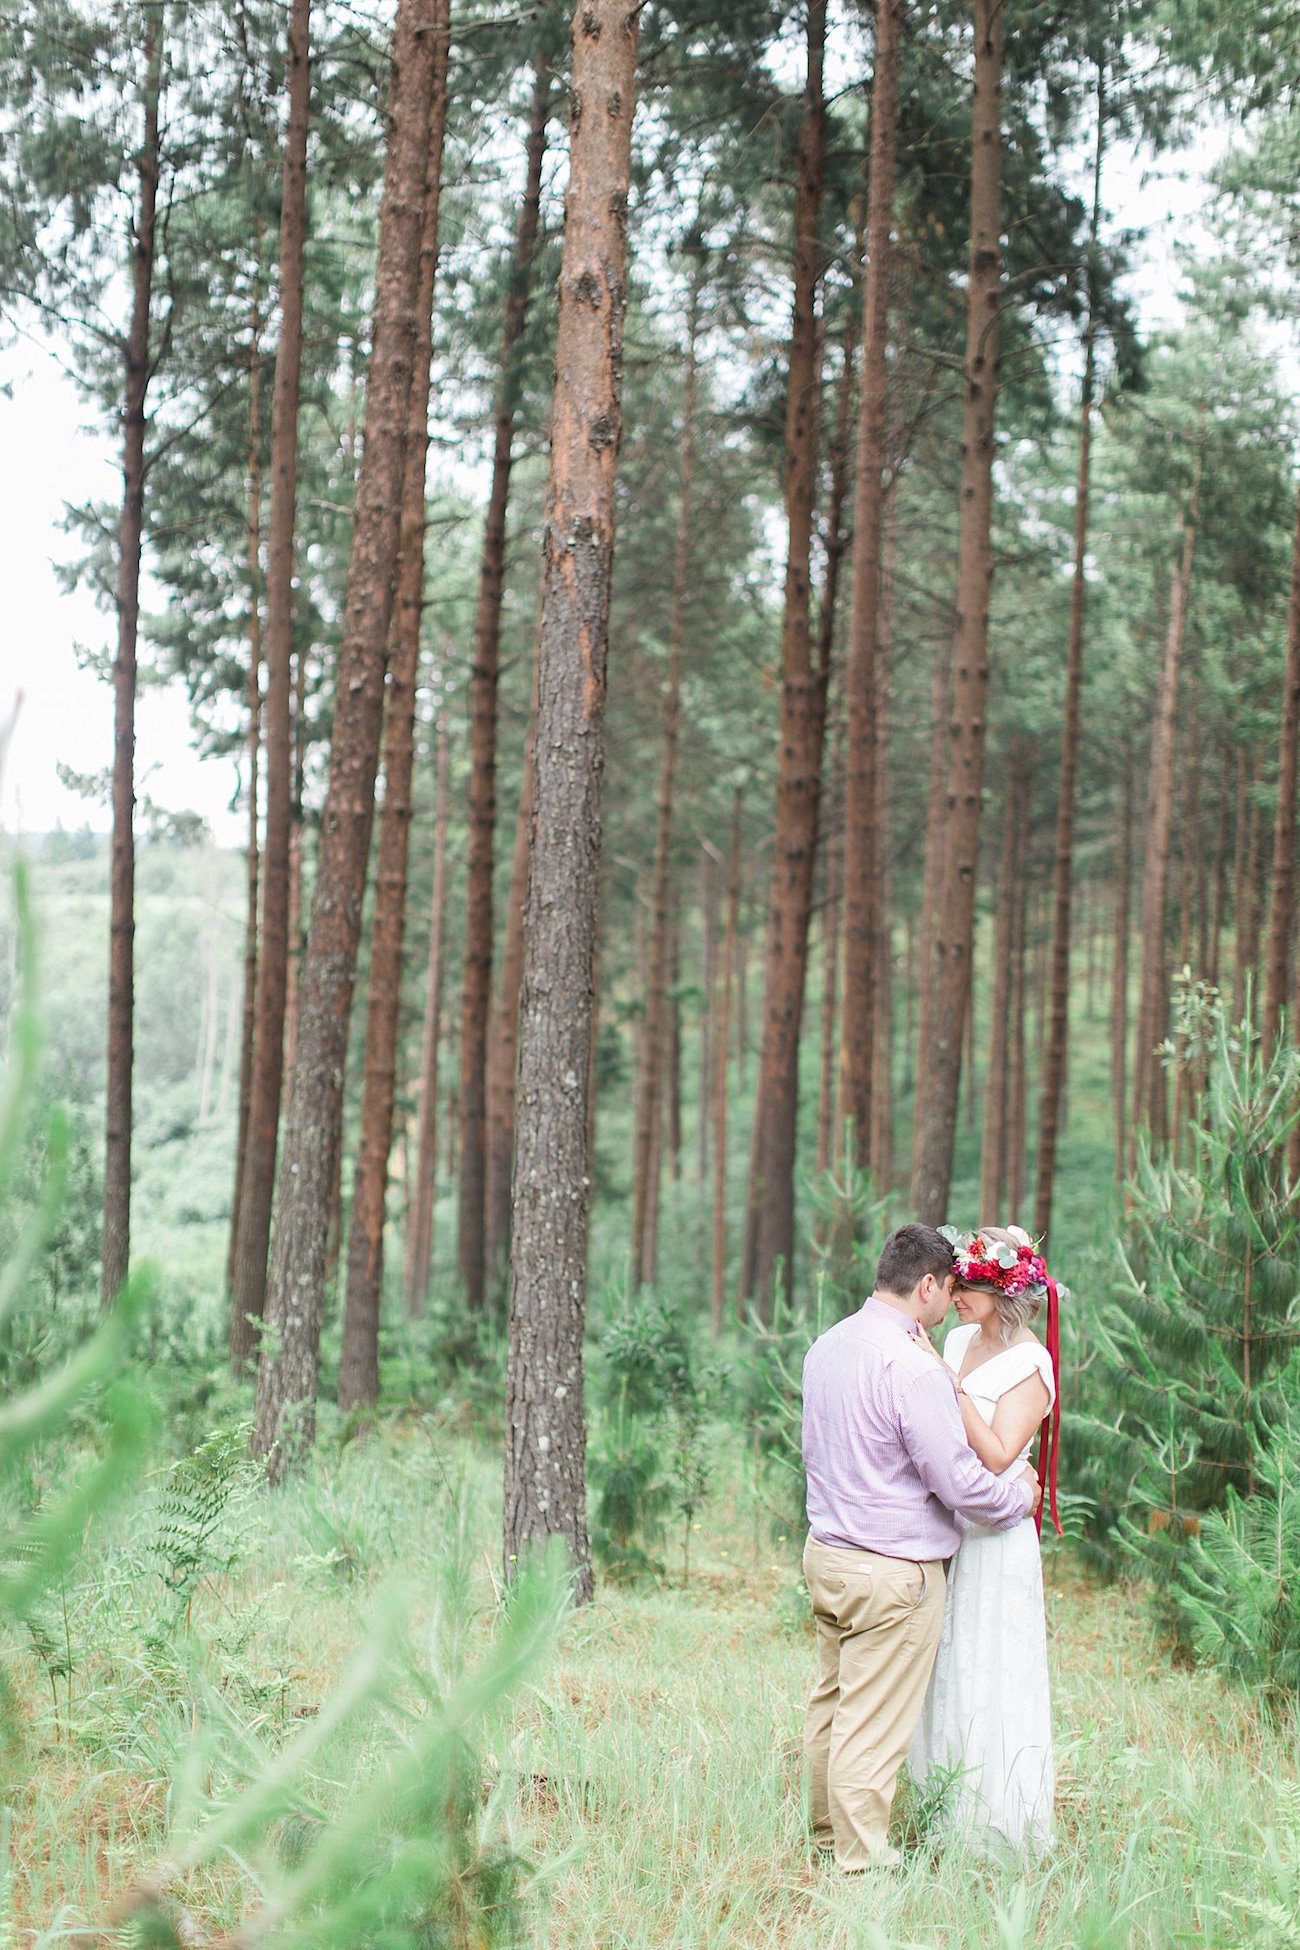 Bride and Groom in Forest | Image: Alicia Landman